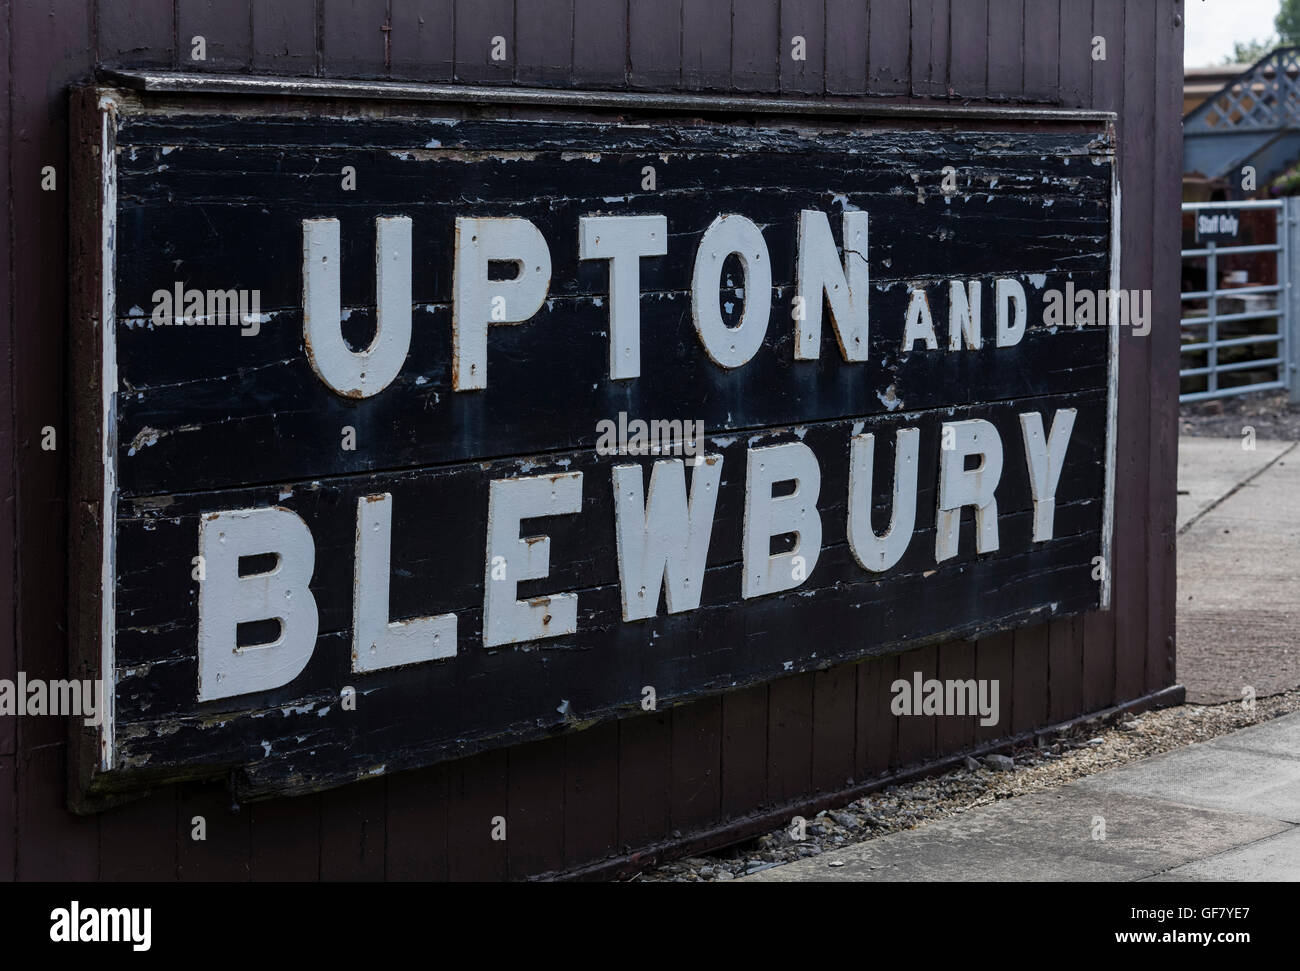 Restored wooden Upton and Blewbury station sign at the Didcot Railway Centre in Oxfordshire Stock Photo